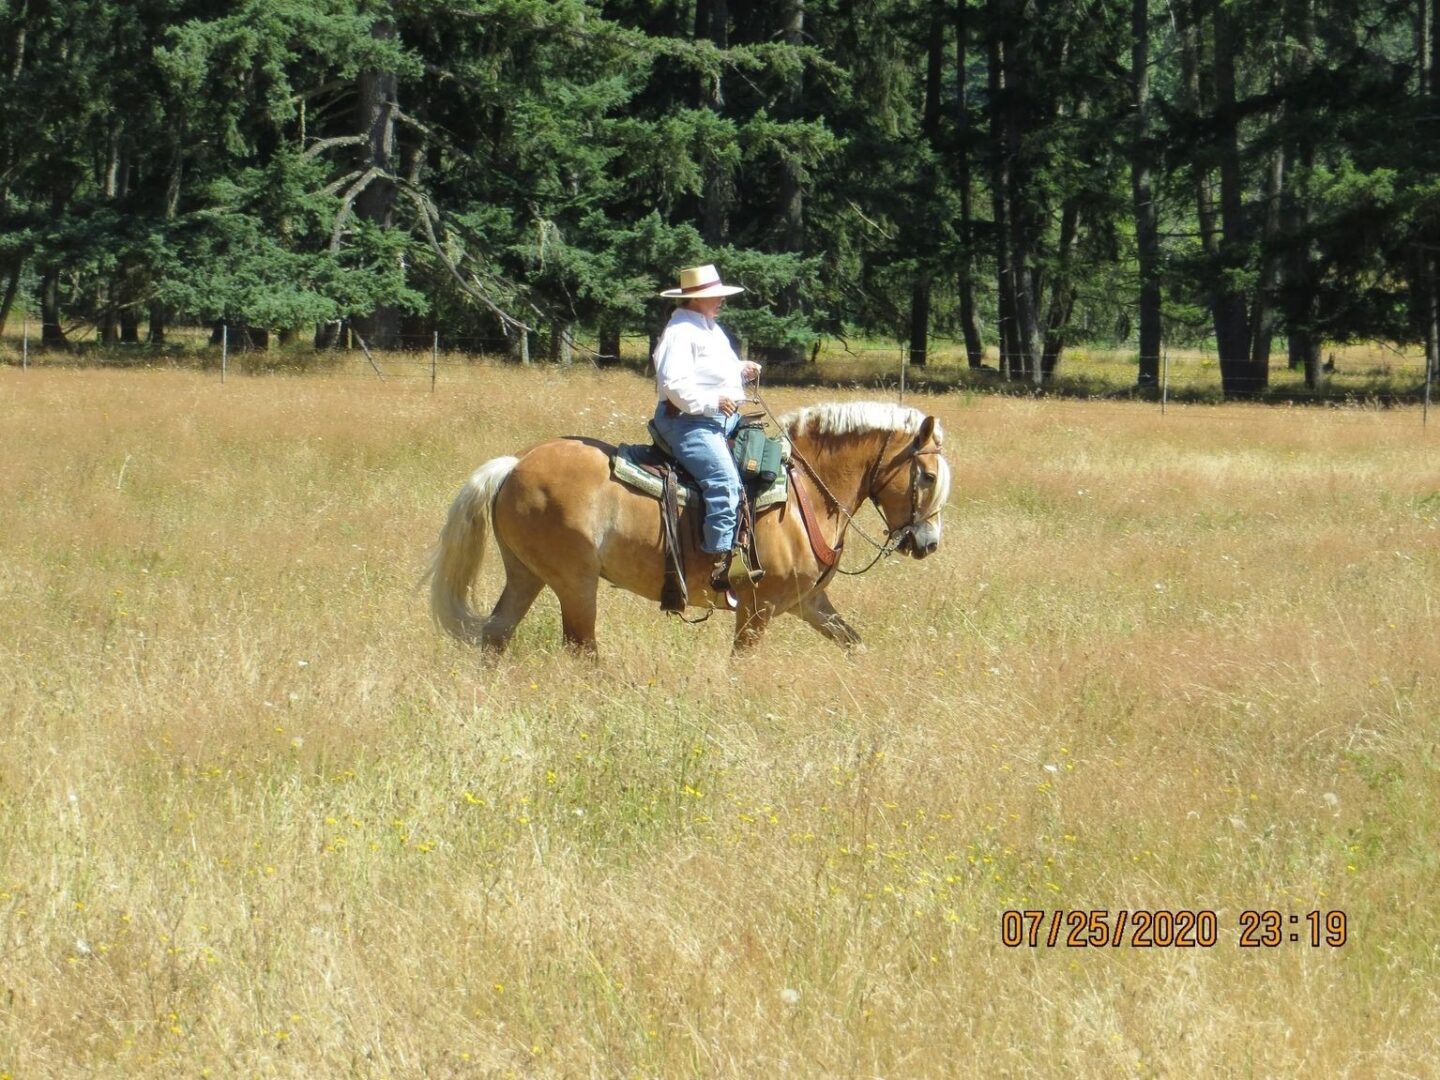 A man riding on the back of a horse through some tall grass.